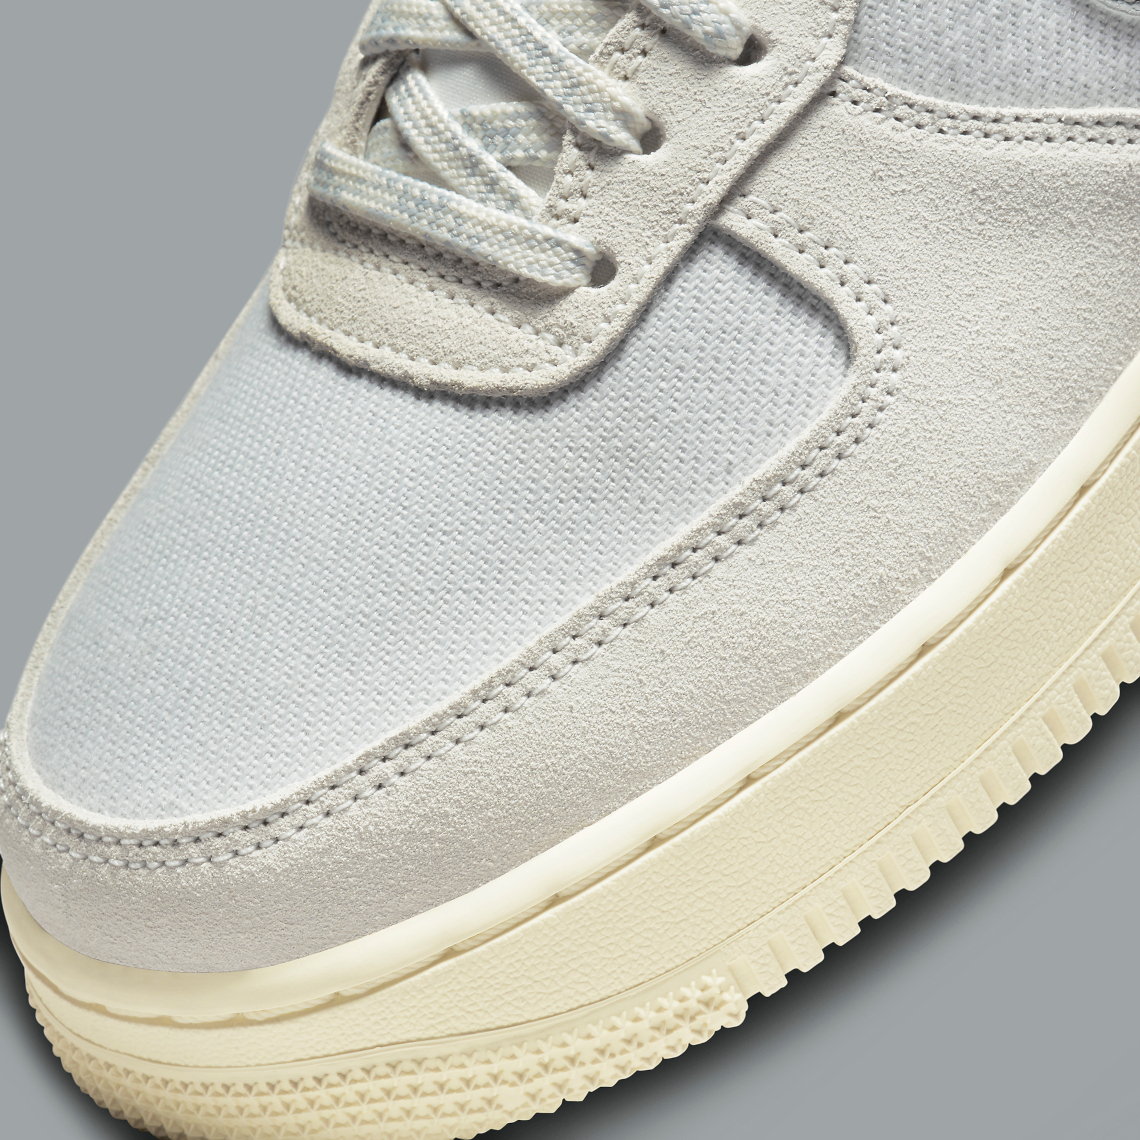 Air Force 1 Certified Fresh Sail Grey On Foot Sneaker Review QuickSchopes  354 Schopes DO9801 100 LV8 